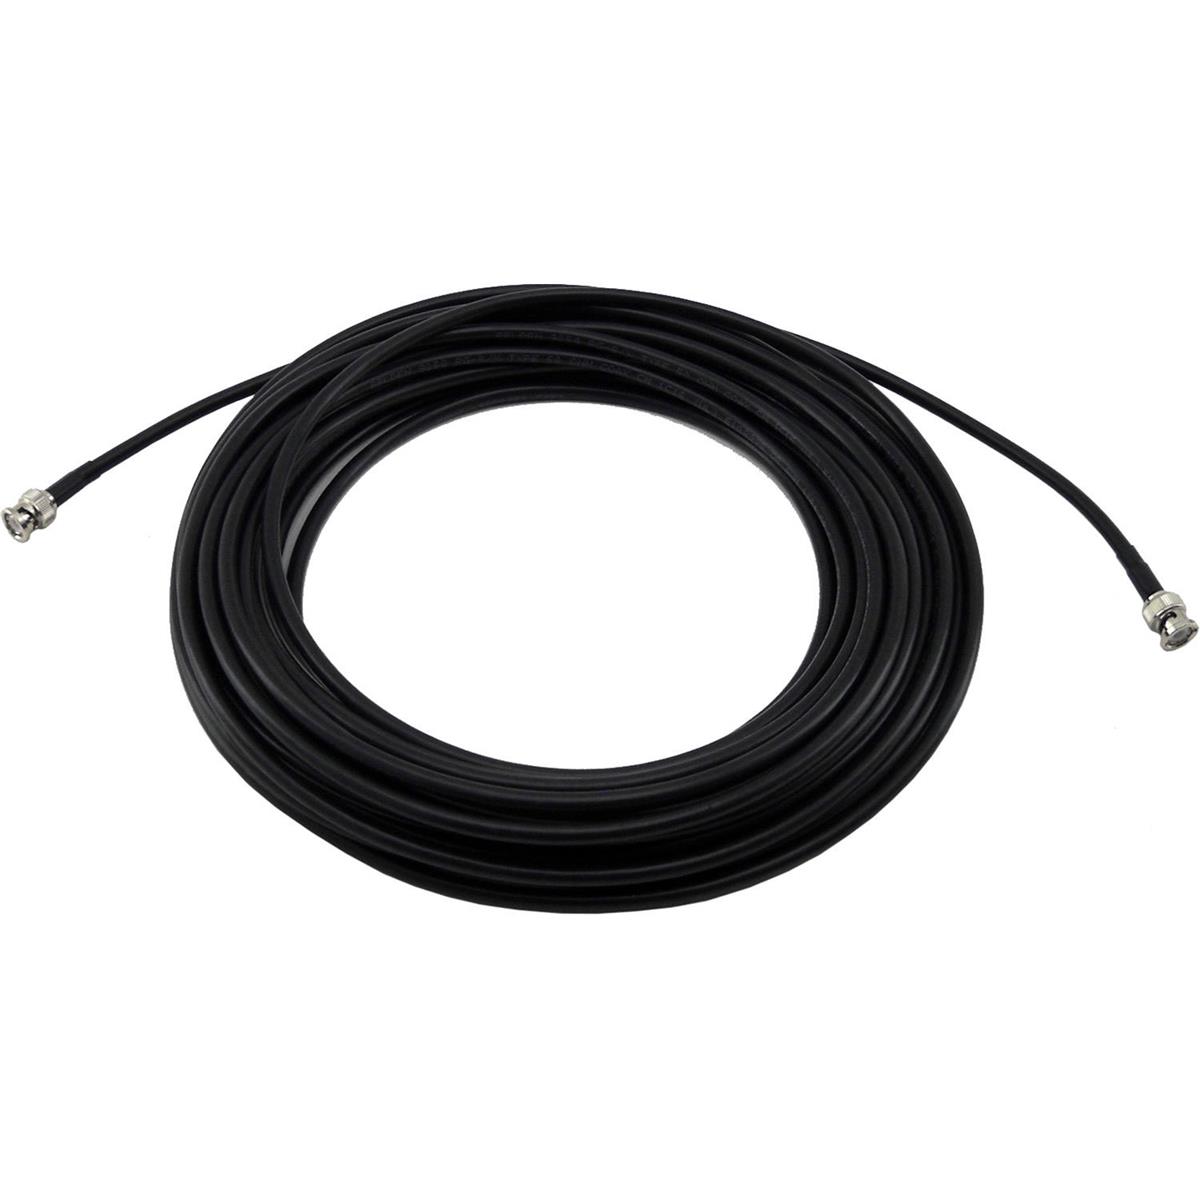 Image of PSC 50' RG59 BNC to BNC Coaxial Cable